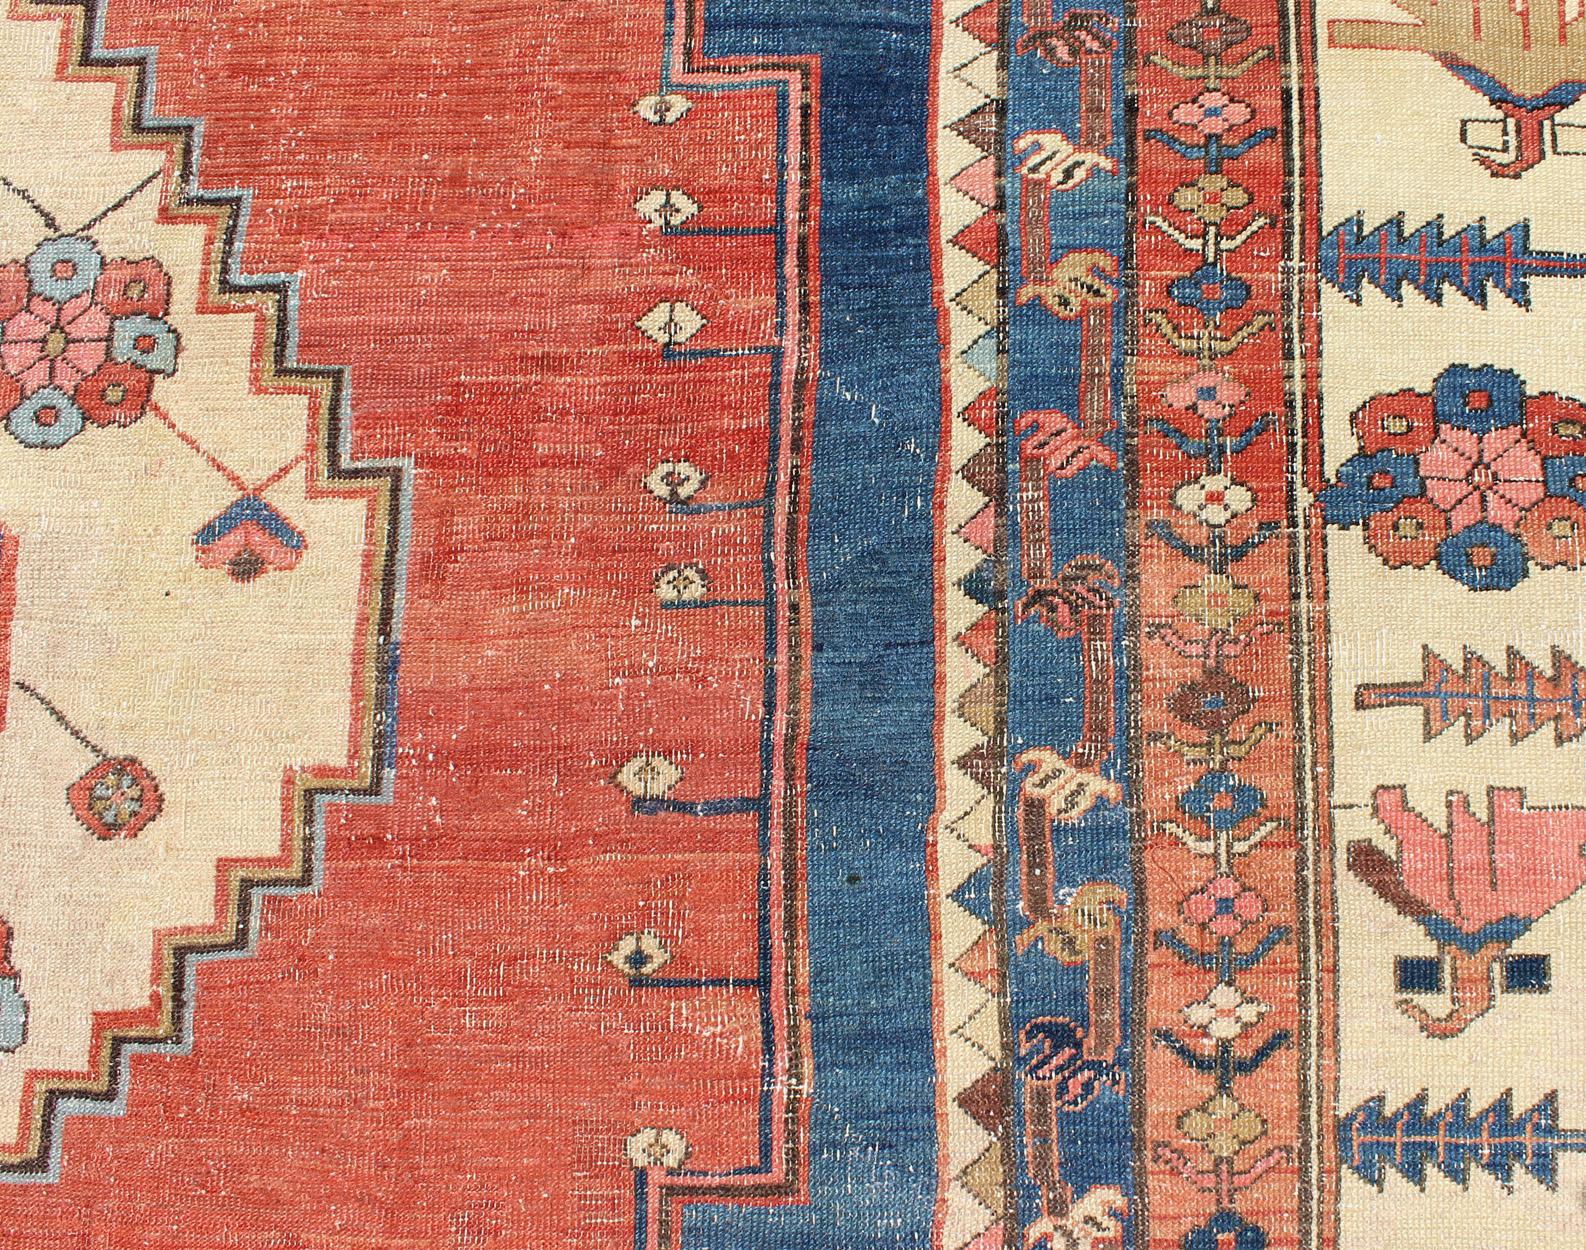 Finely Woven 19th Century Antique Persian Bakhshaiesh Rug in Rust Red and Blue For Sale 8